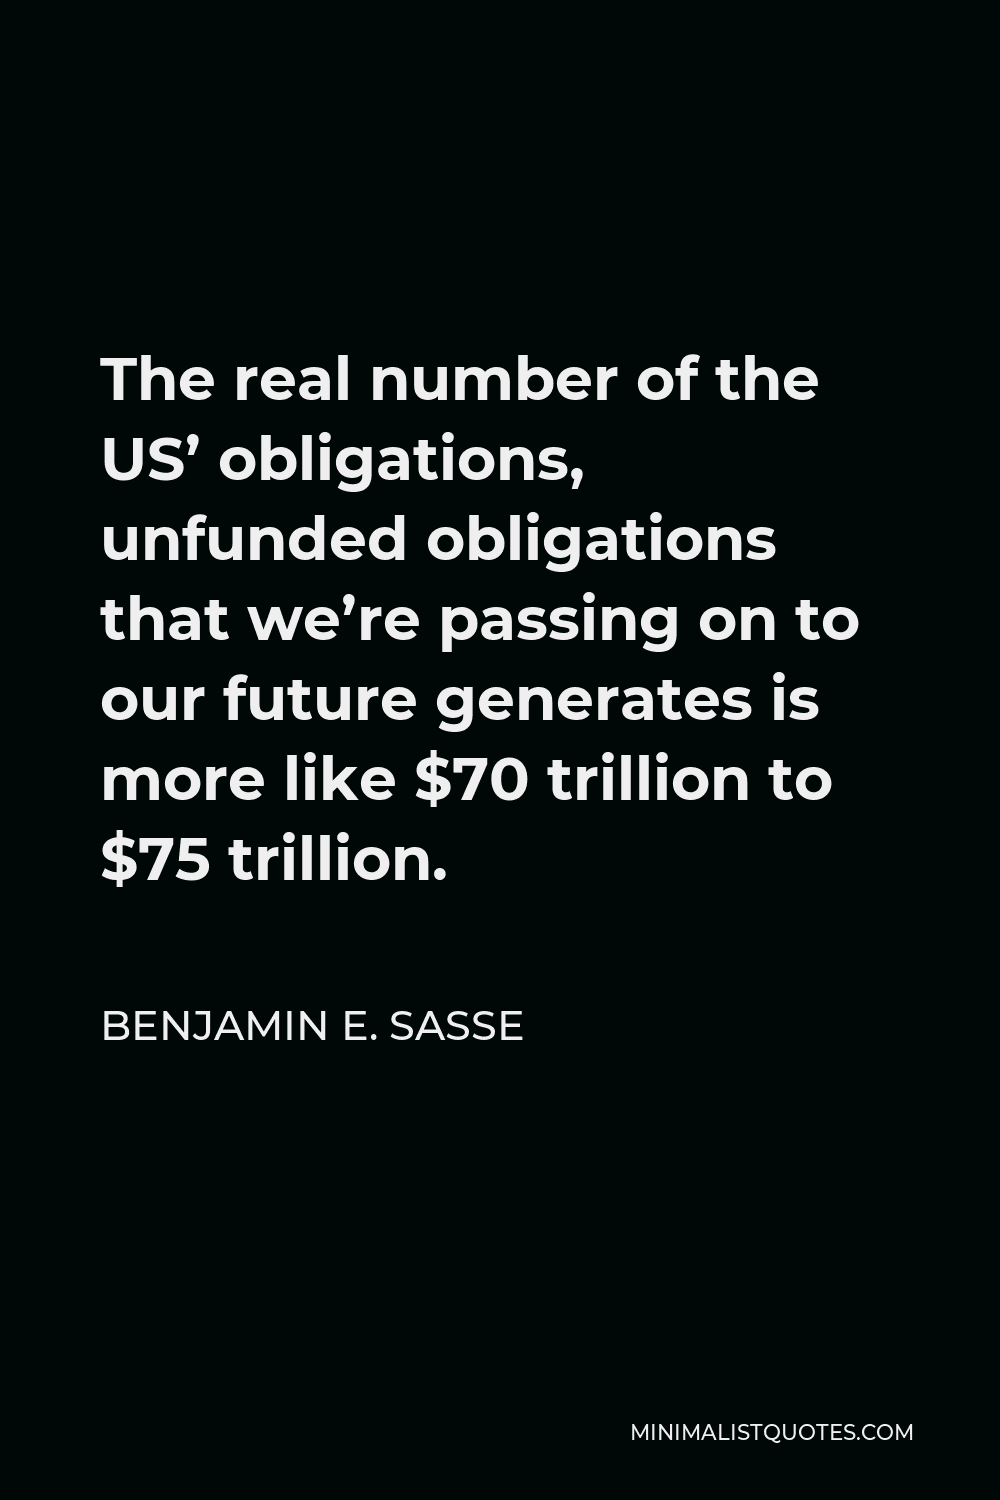 Benjamin E. Sasse Quote - The real number of the US’ obligations, unfunded obligations that we’re passing on to our future generates is more like $70 trillion to $75 trillion.